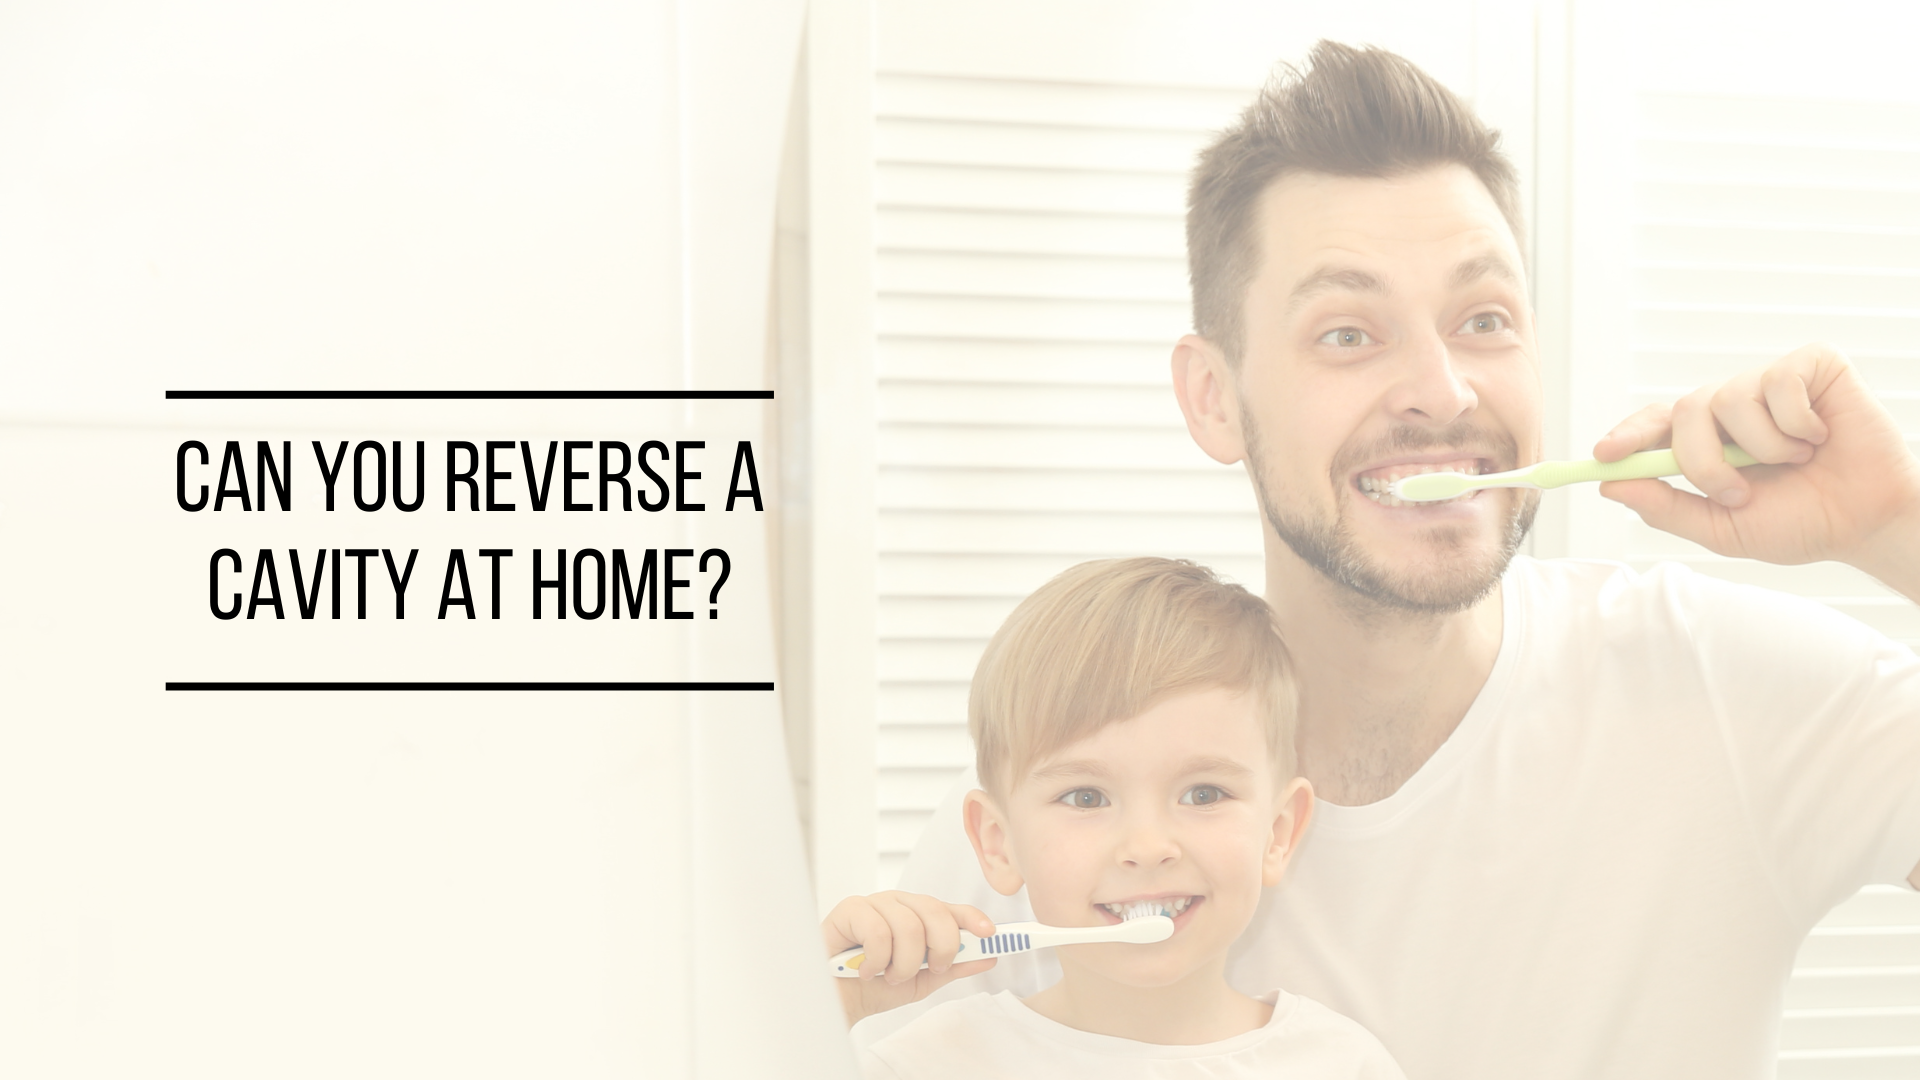 Can You Reverse A Cavity At Home?